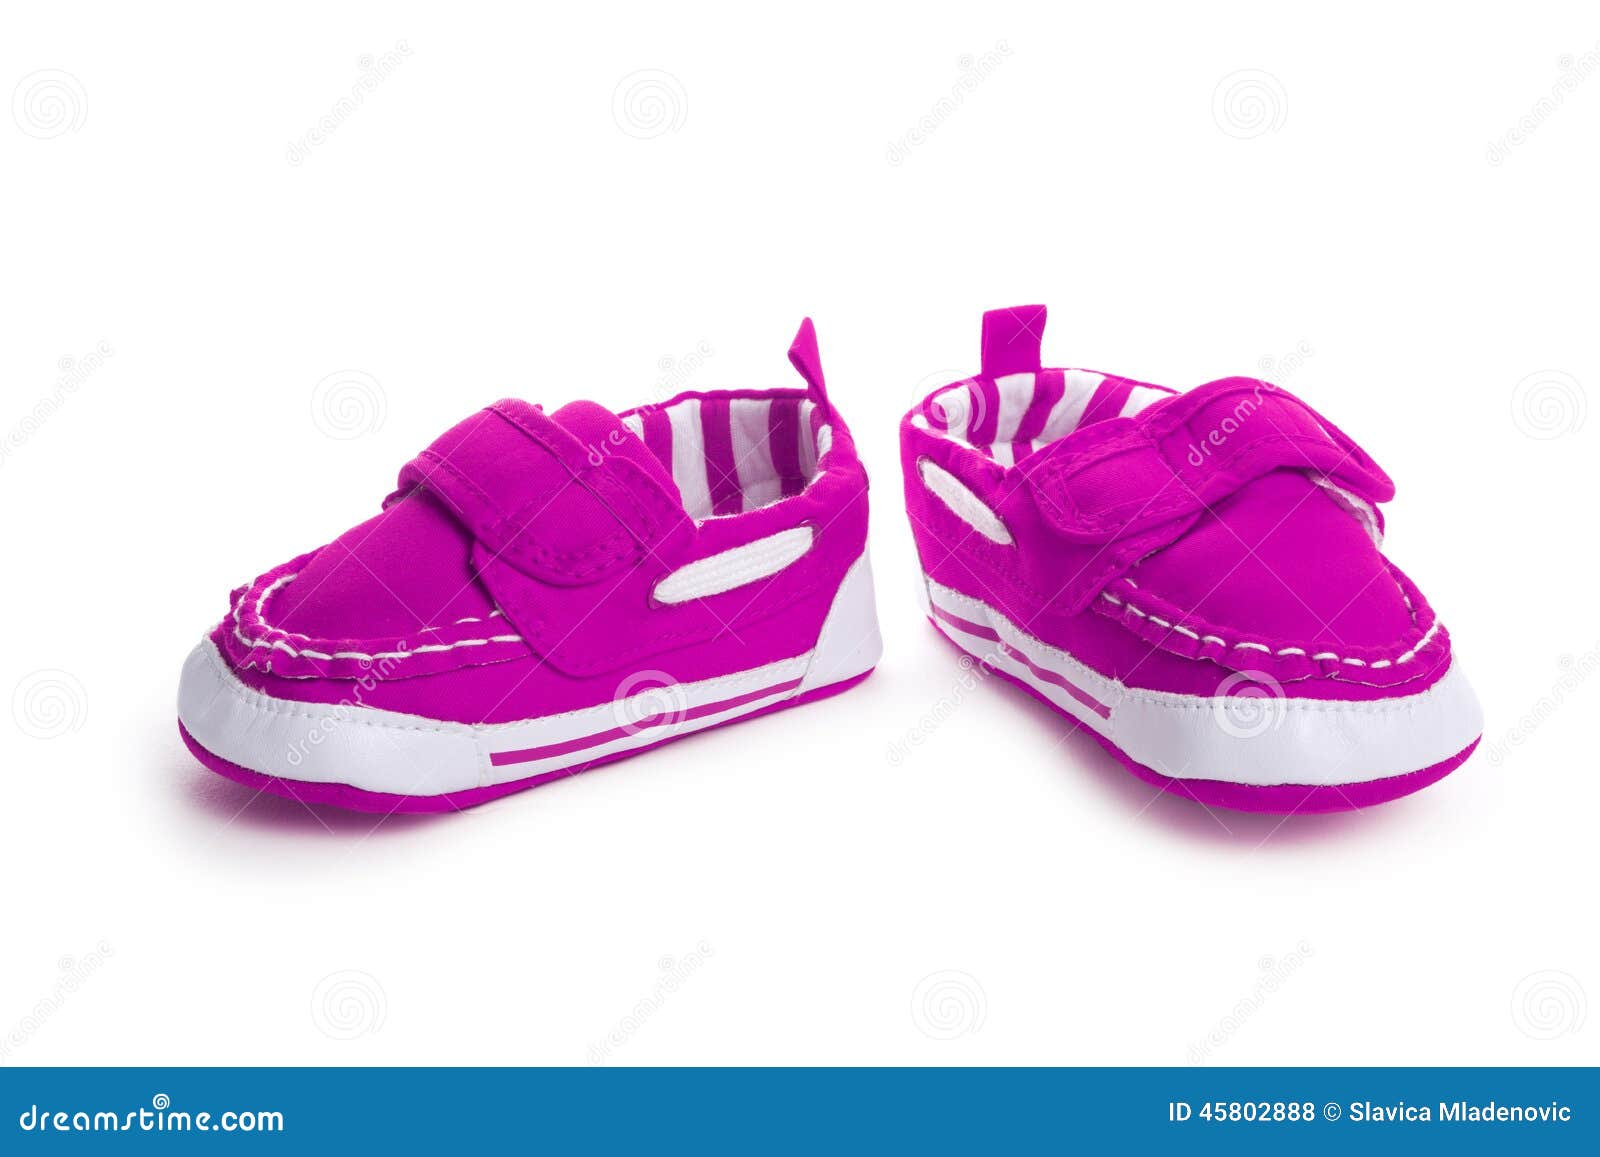 Children Shoes Isolated on White Background. Freestyle Comfort Colorful ...